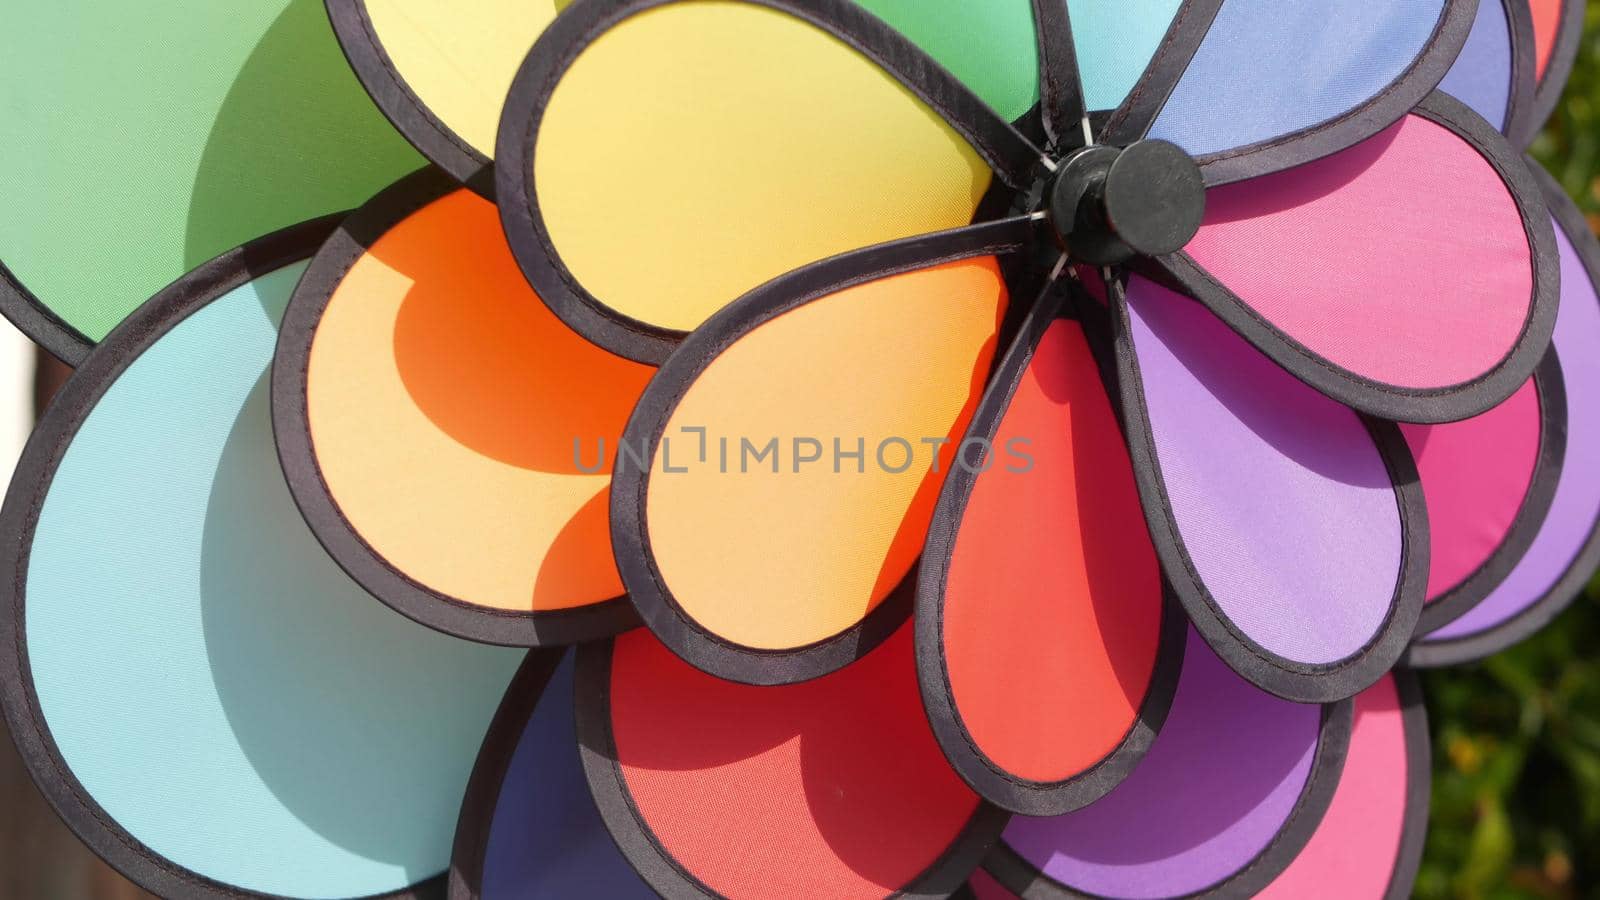 Colorful pinwheel spinning, weather wind vane, garden decoration in USA. Rainbow symbol of childhood, fantasy and imagination rotating. Multi colored spiral toy turning in breeze. Summertime dreaming.